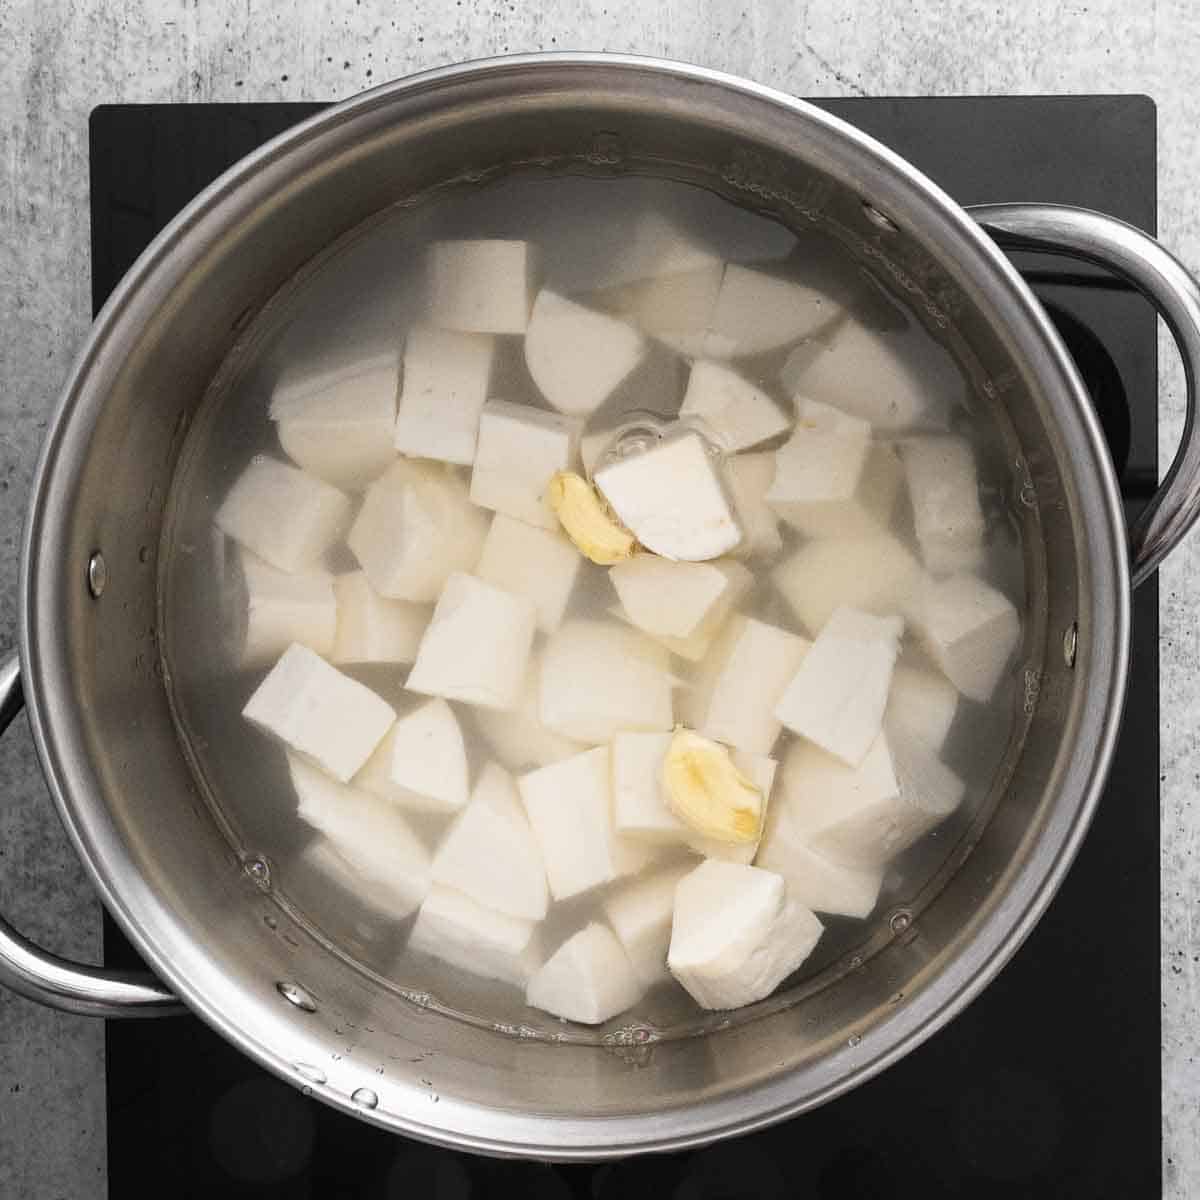 top view of the pot with yuca, garlic cloves and water